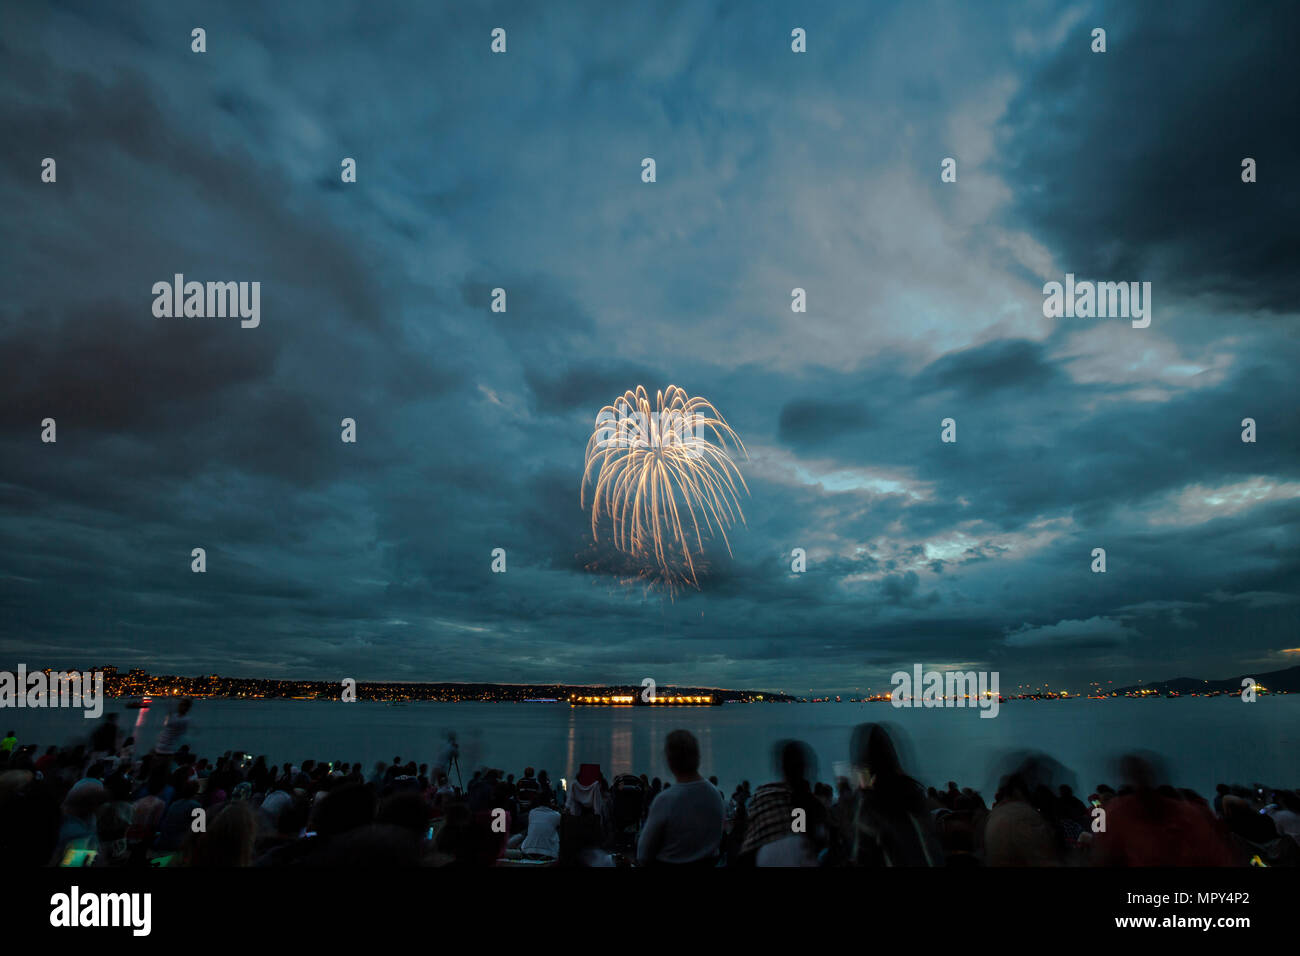 People enjoying firework display against cloudy sky over river at night Stock Photo